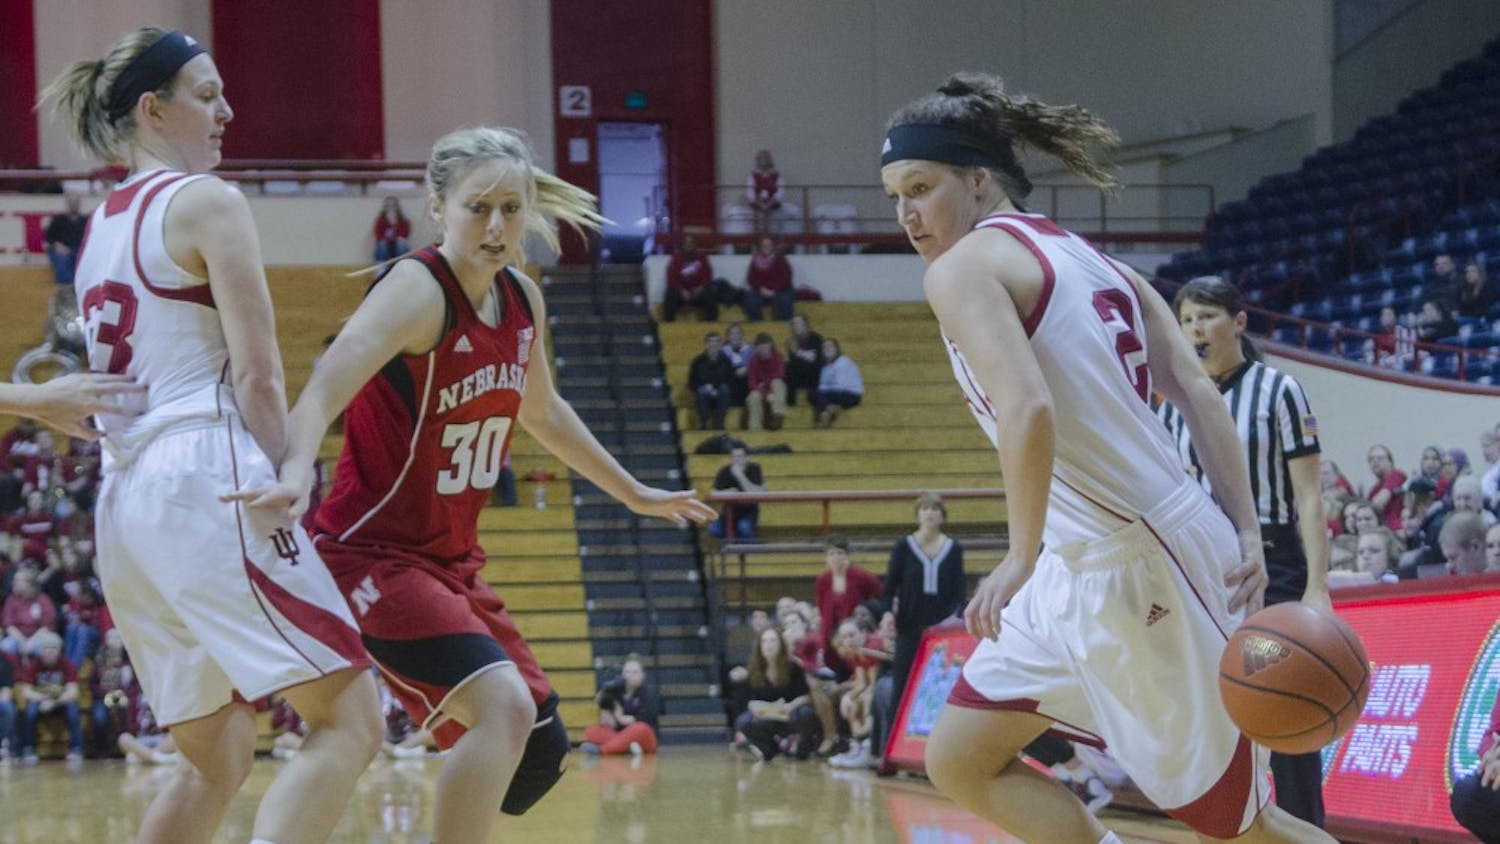 Freshman guard Jess Walter dribbles behind her back while freshman forward Amanda Cahill sets a screen against Nebraska at Assembly Hall during the Hoosier's final home game of the season. IU lost 67-64. 